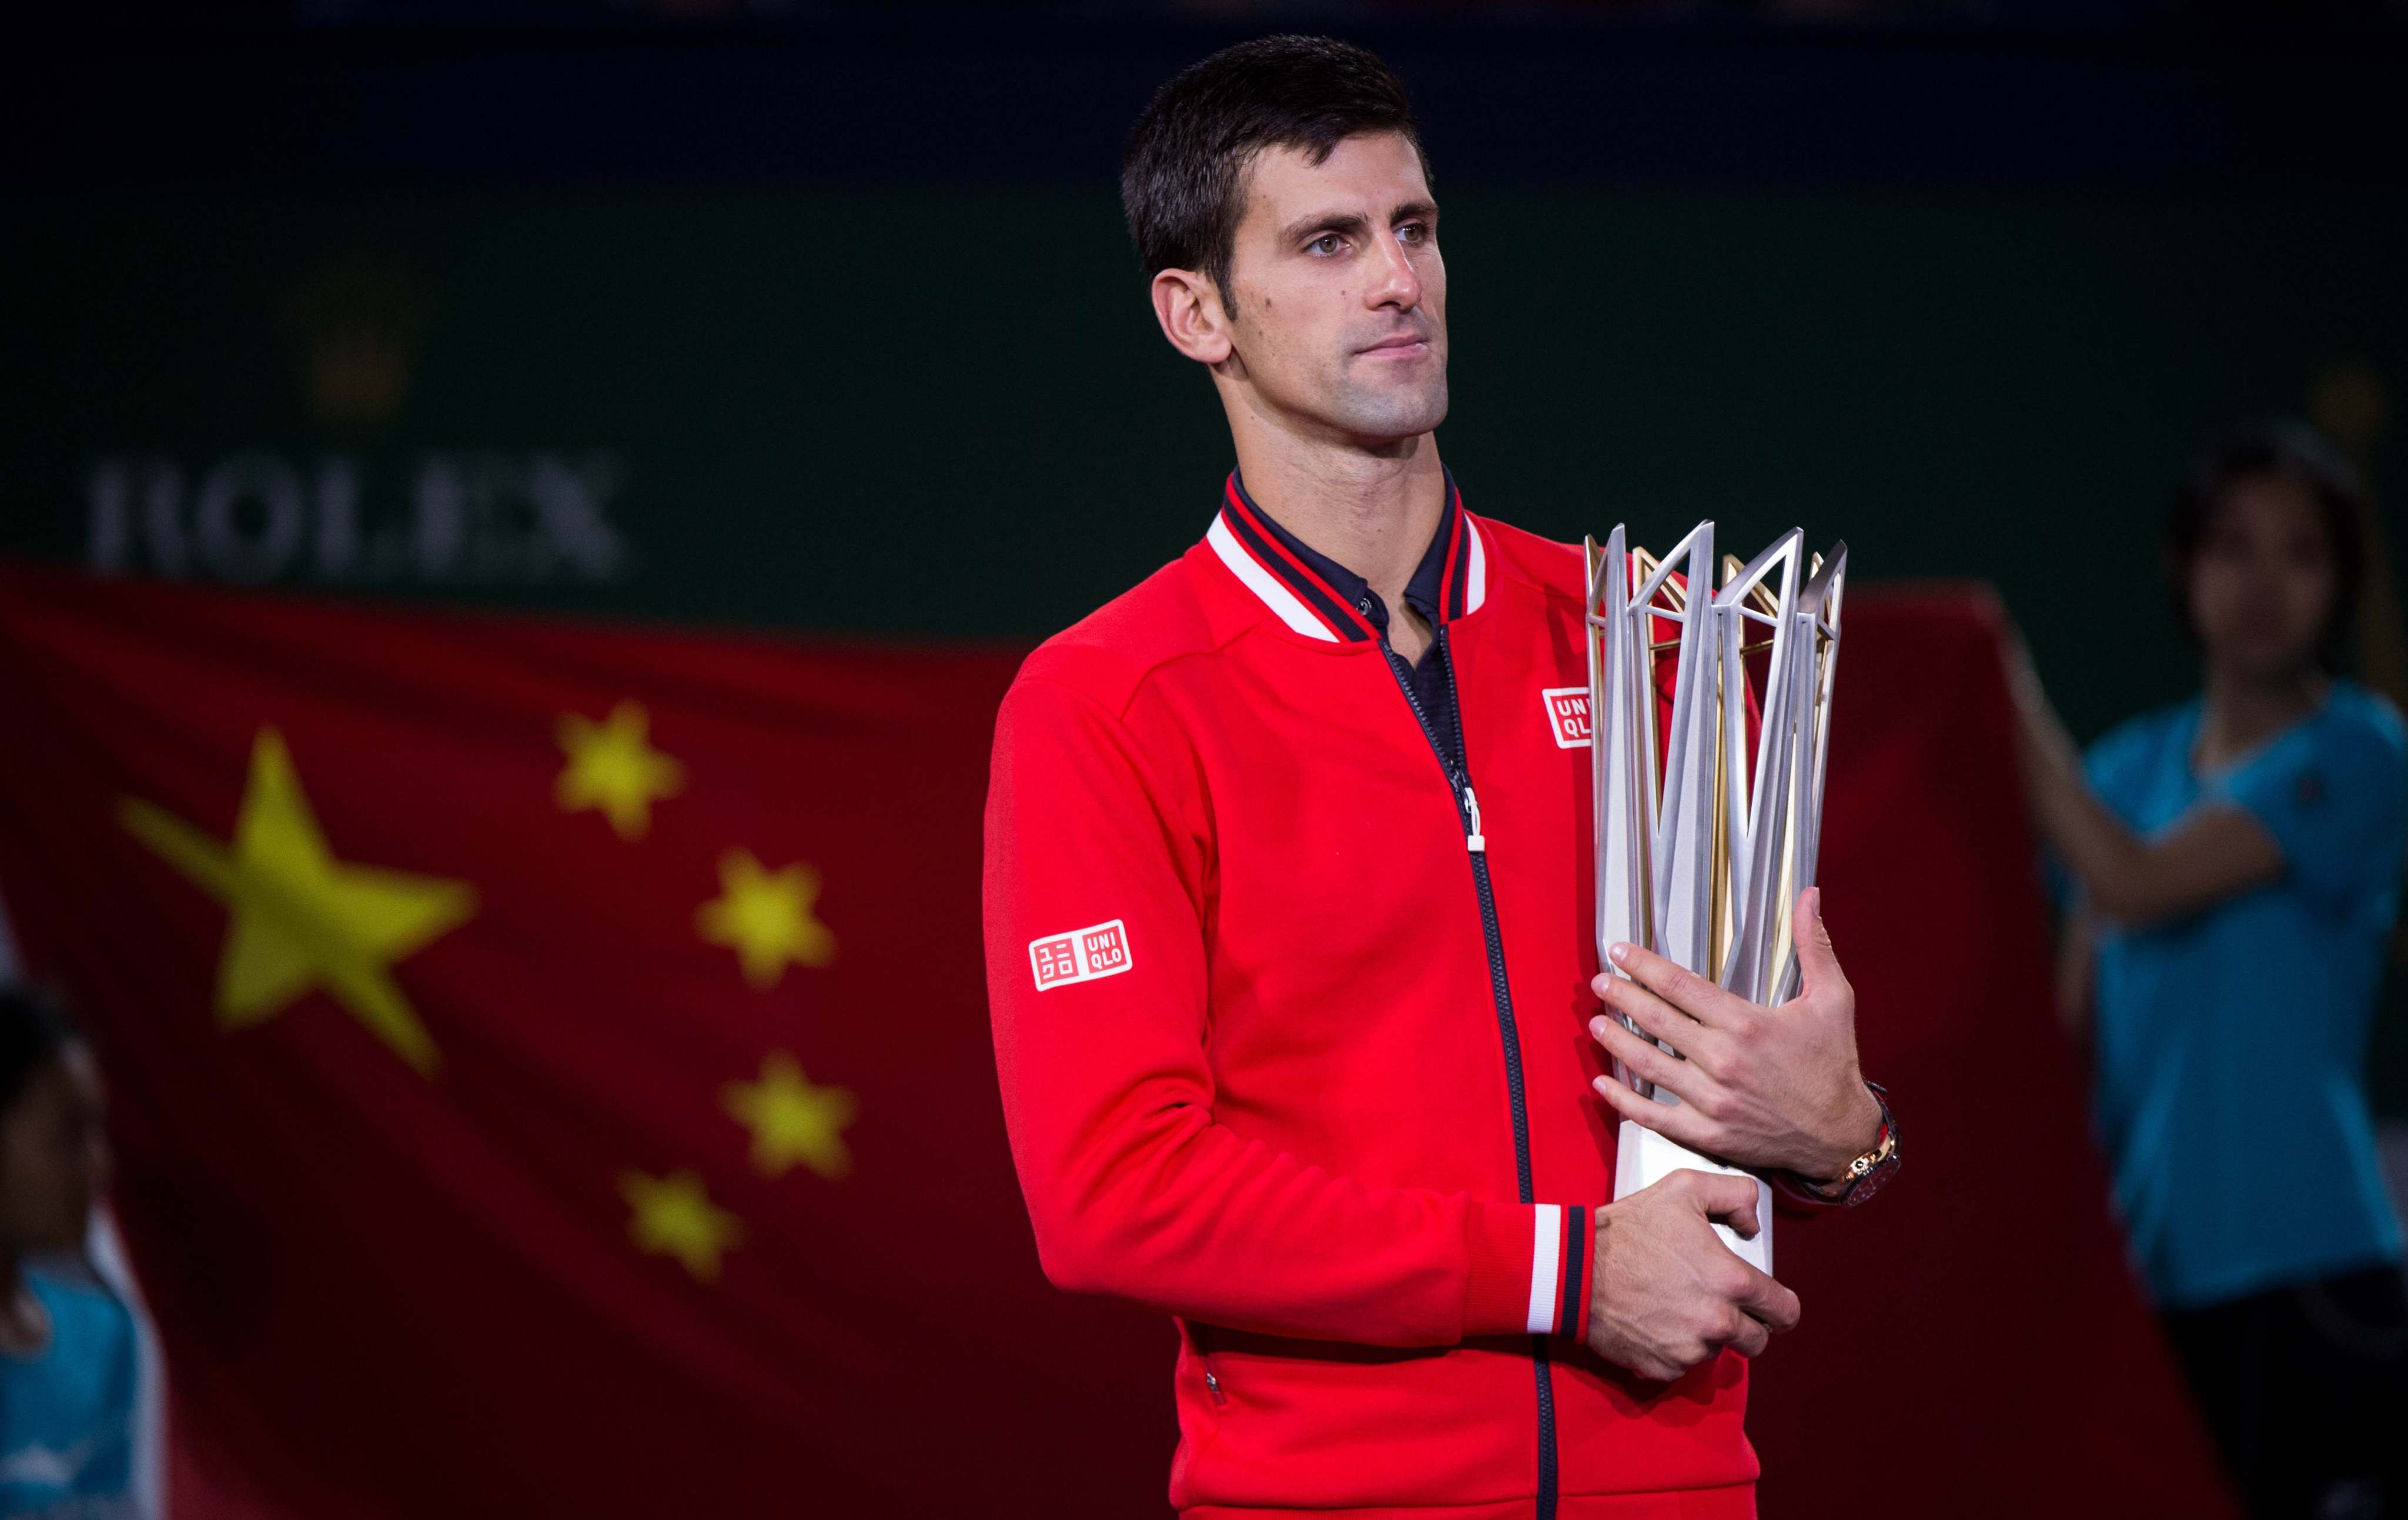 Novak Djokovic holds his trophy after winning the 2015 Shanghai Masters final. Photo: AFP